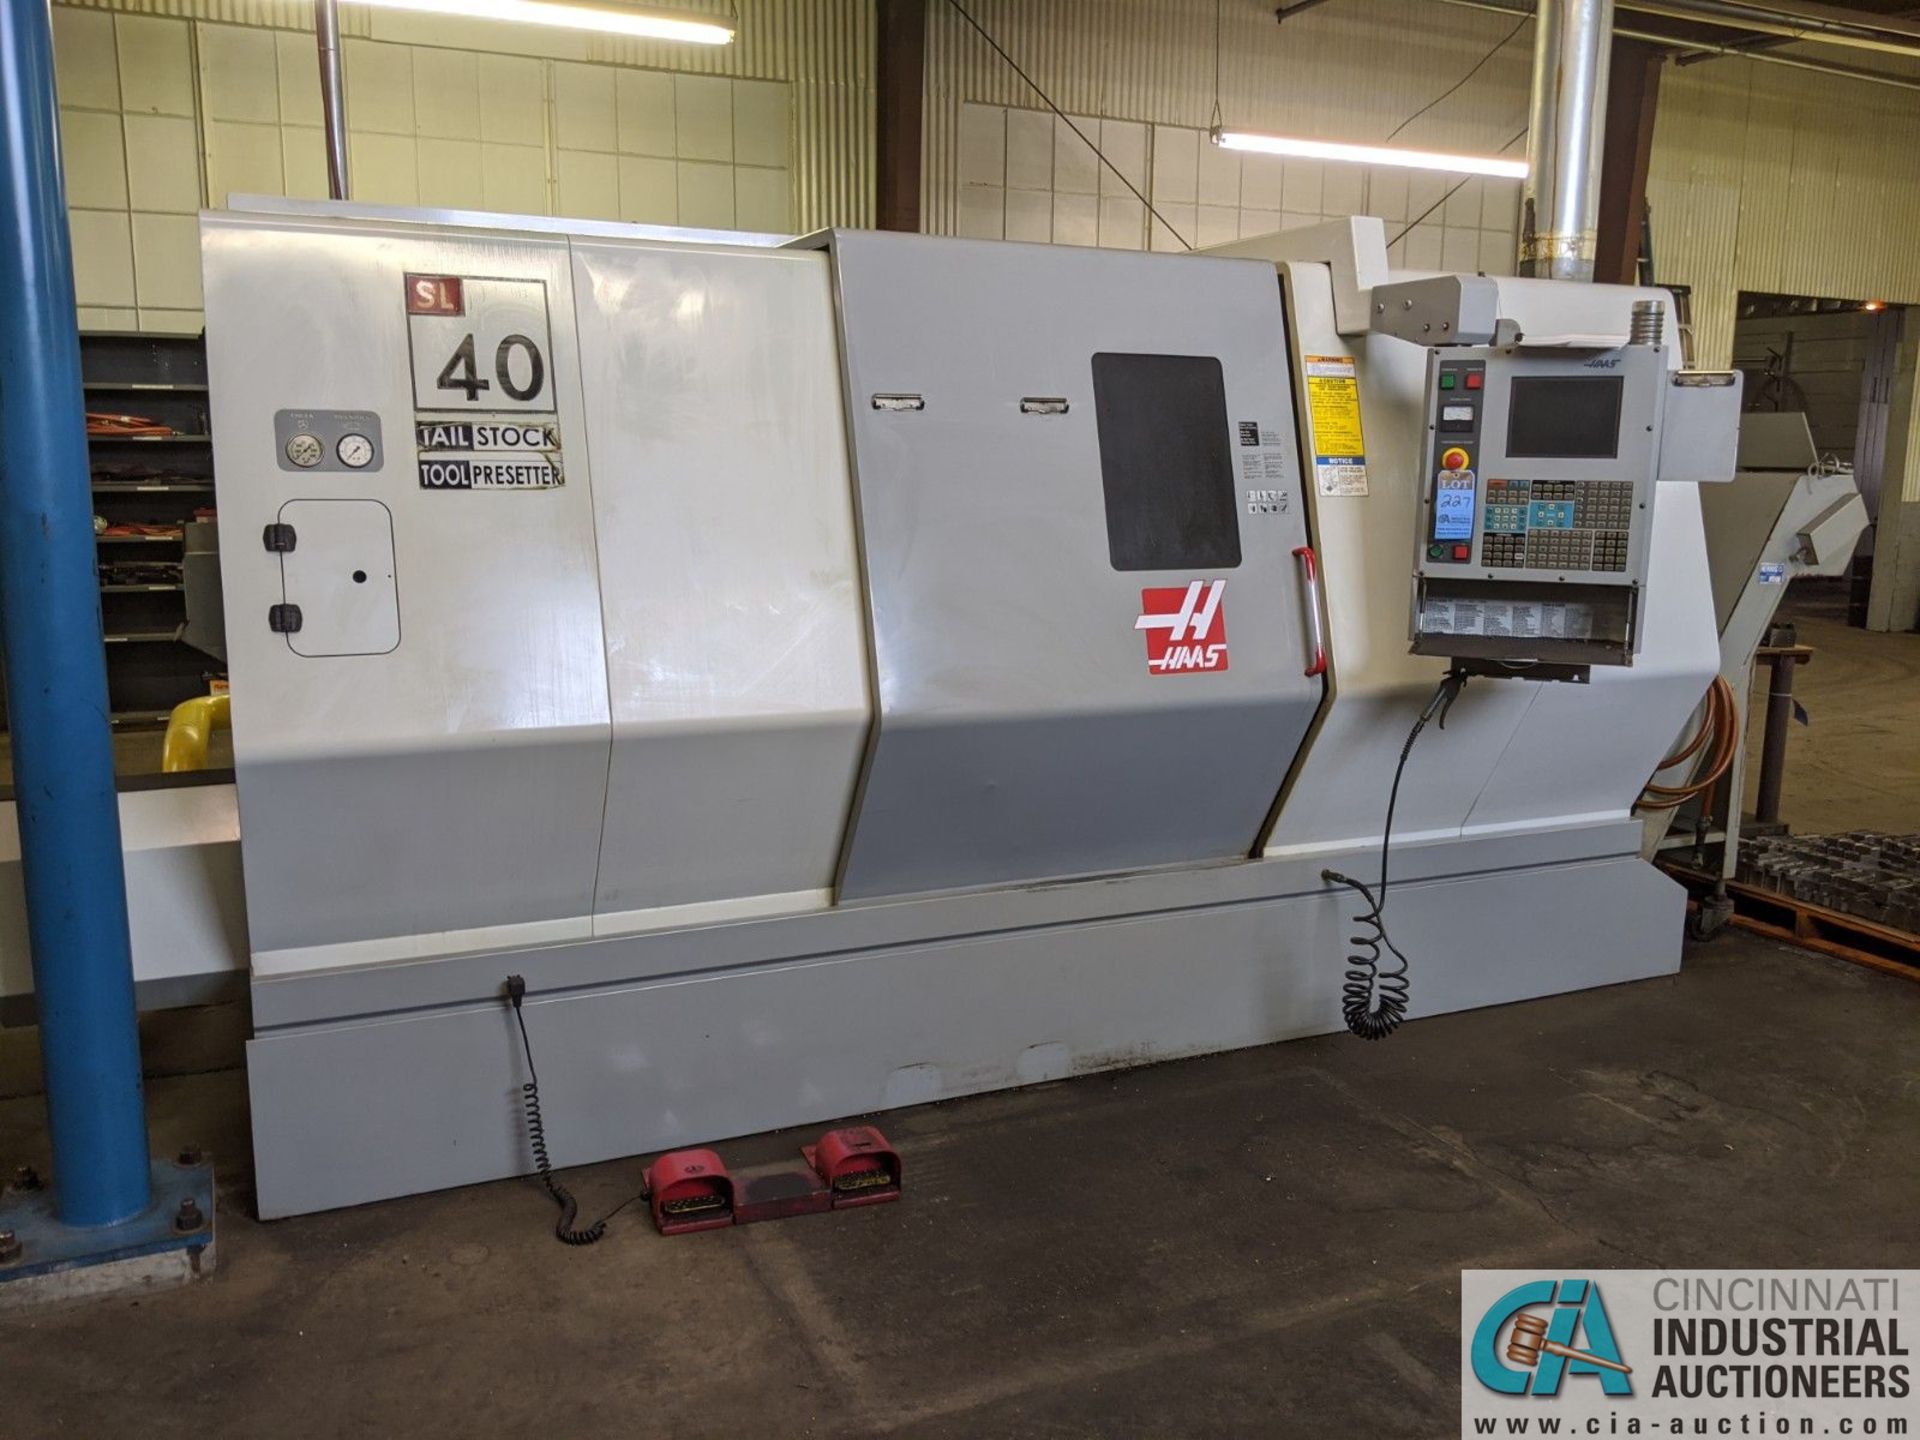 HAAS MODEL SL-40T CNC TURNING CENTER; S/N 69082, 18" 3-JAW CHUCK, 10 POSITION TURRET, TAILSTOCK,